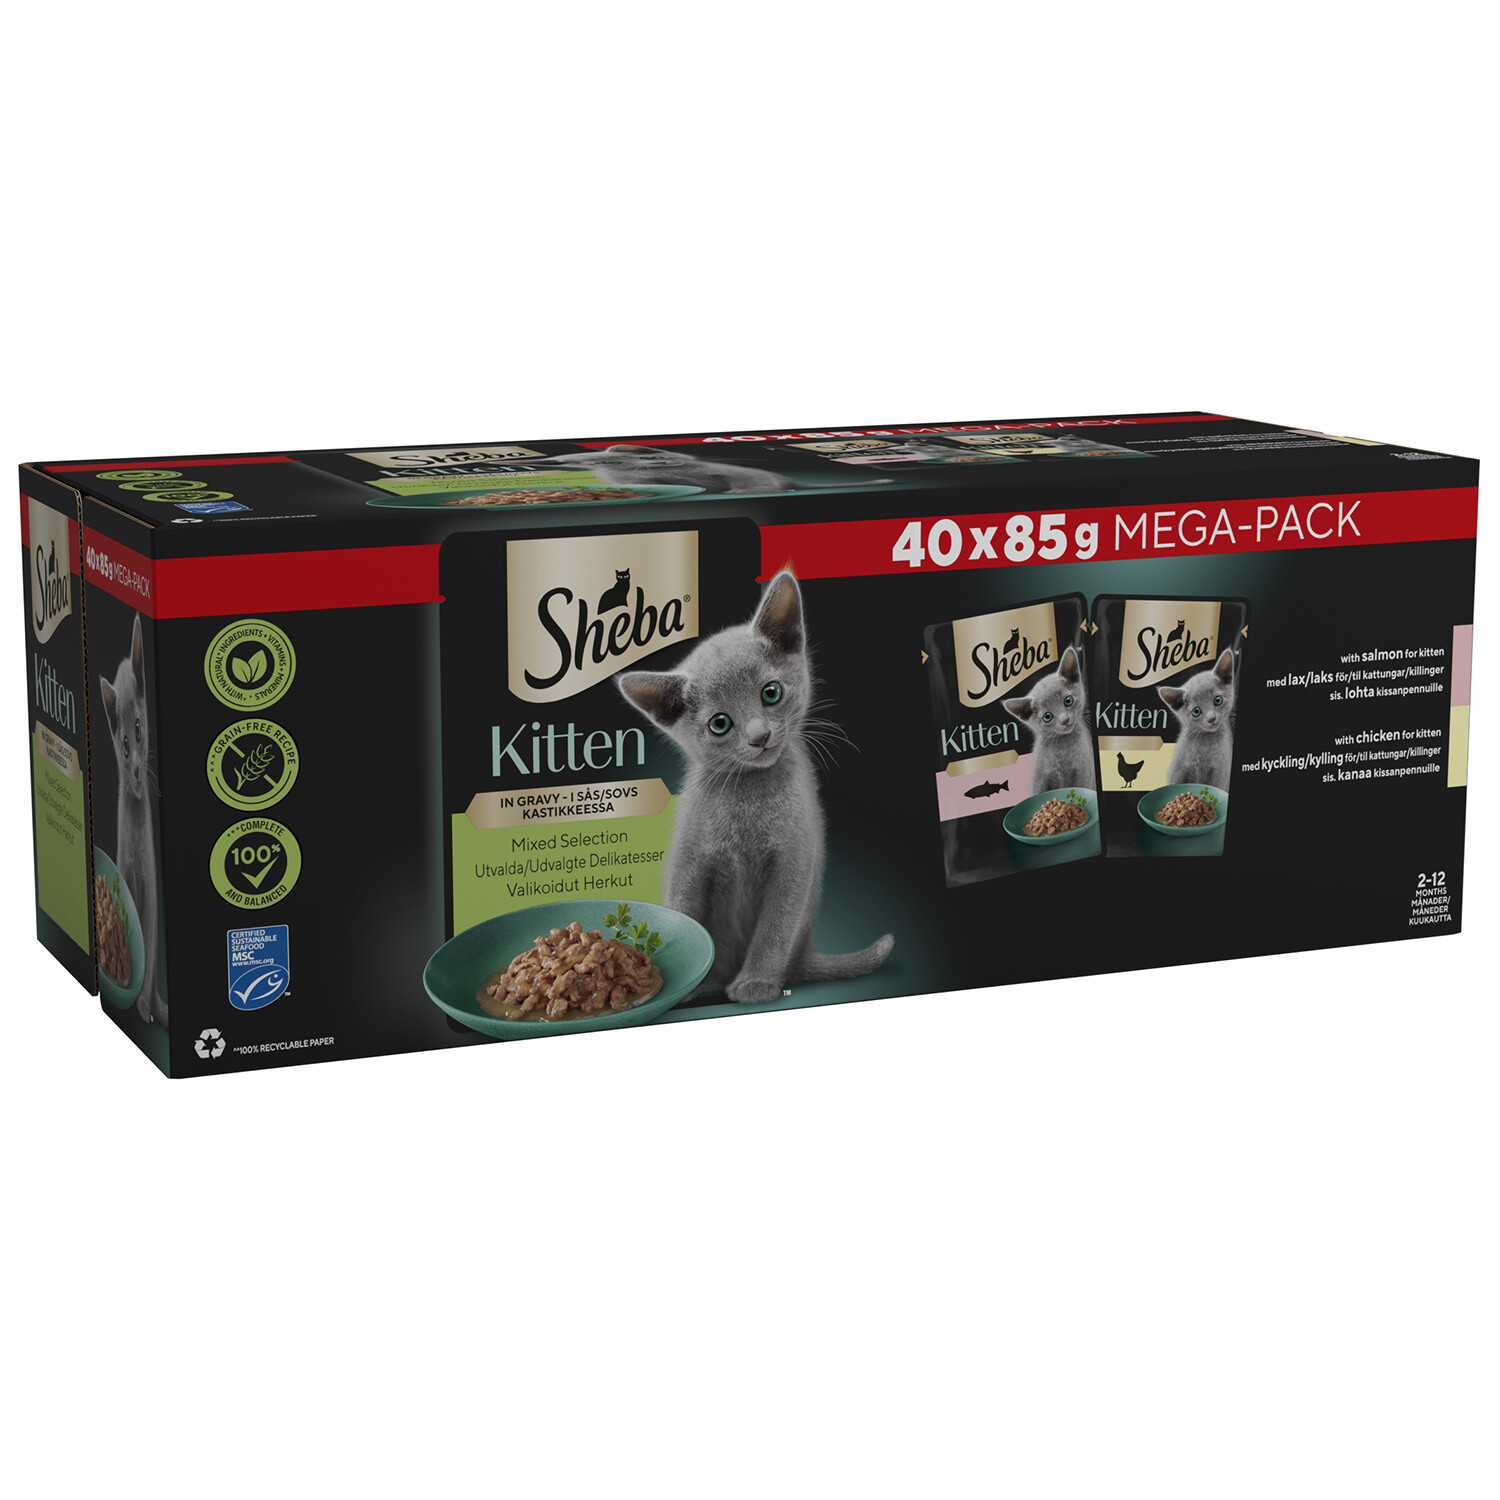 Sheba Mixed Selection Kitten Food Pouches in Gravy - 40 Image 3